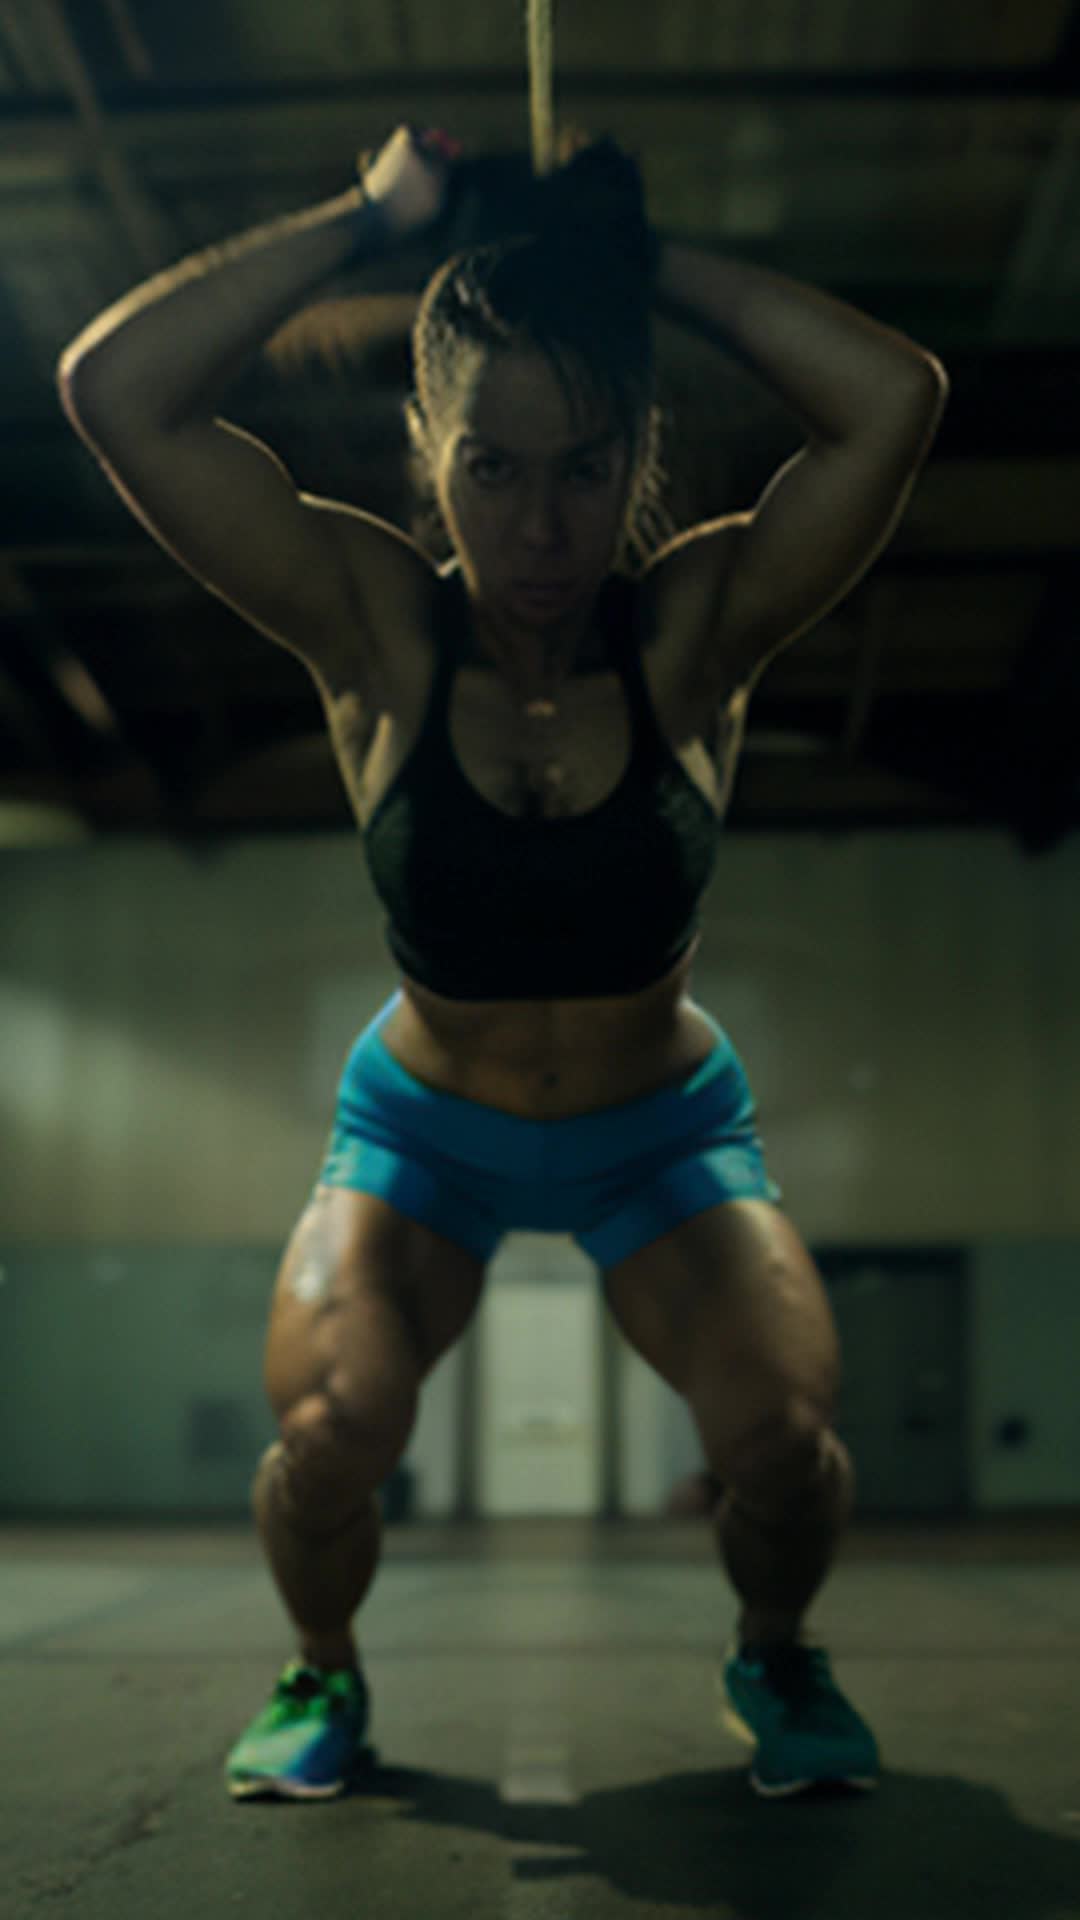 Dilapidated gym interior, flickering overhead lights, female athlete, intense lunging, worn-out equipment creaking, muscles visibly strained, rush of exertion, nostalgic, gritty atmosphere, nostalgic, high-energy